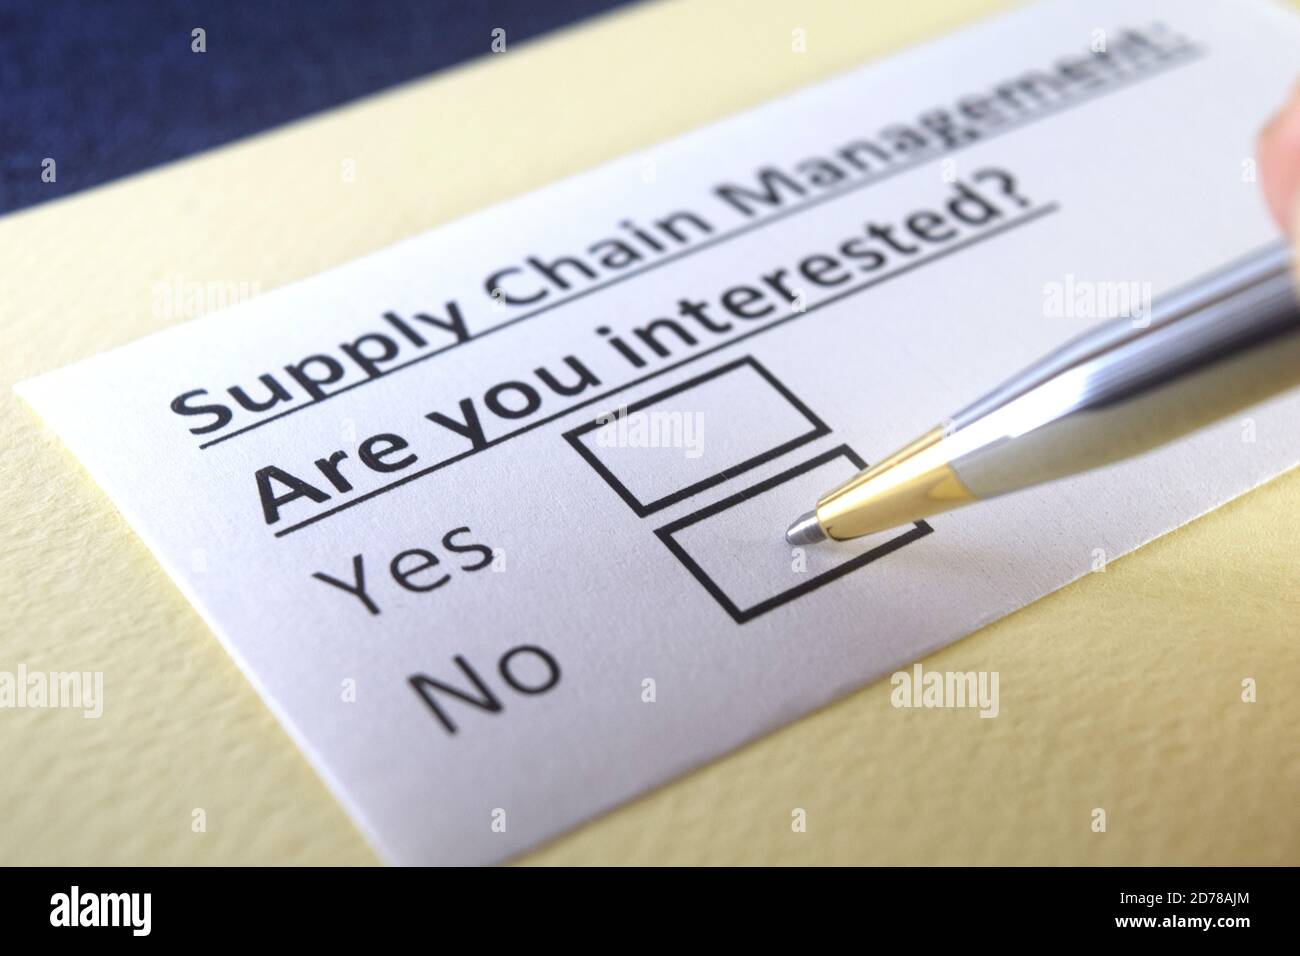 One person is answering question about supply chain management. Stock Photo